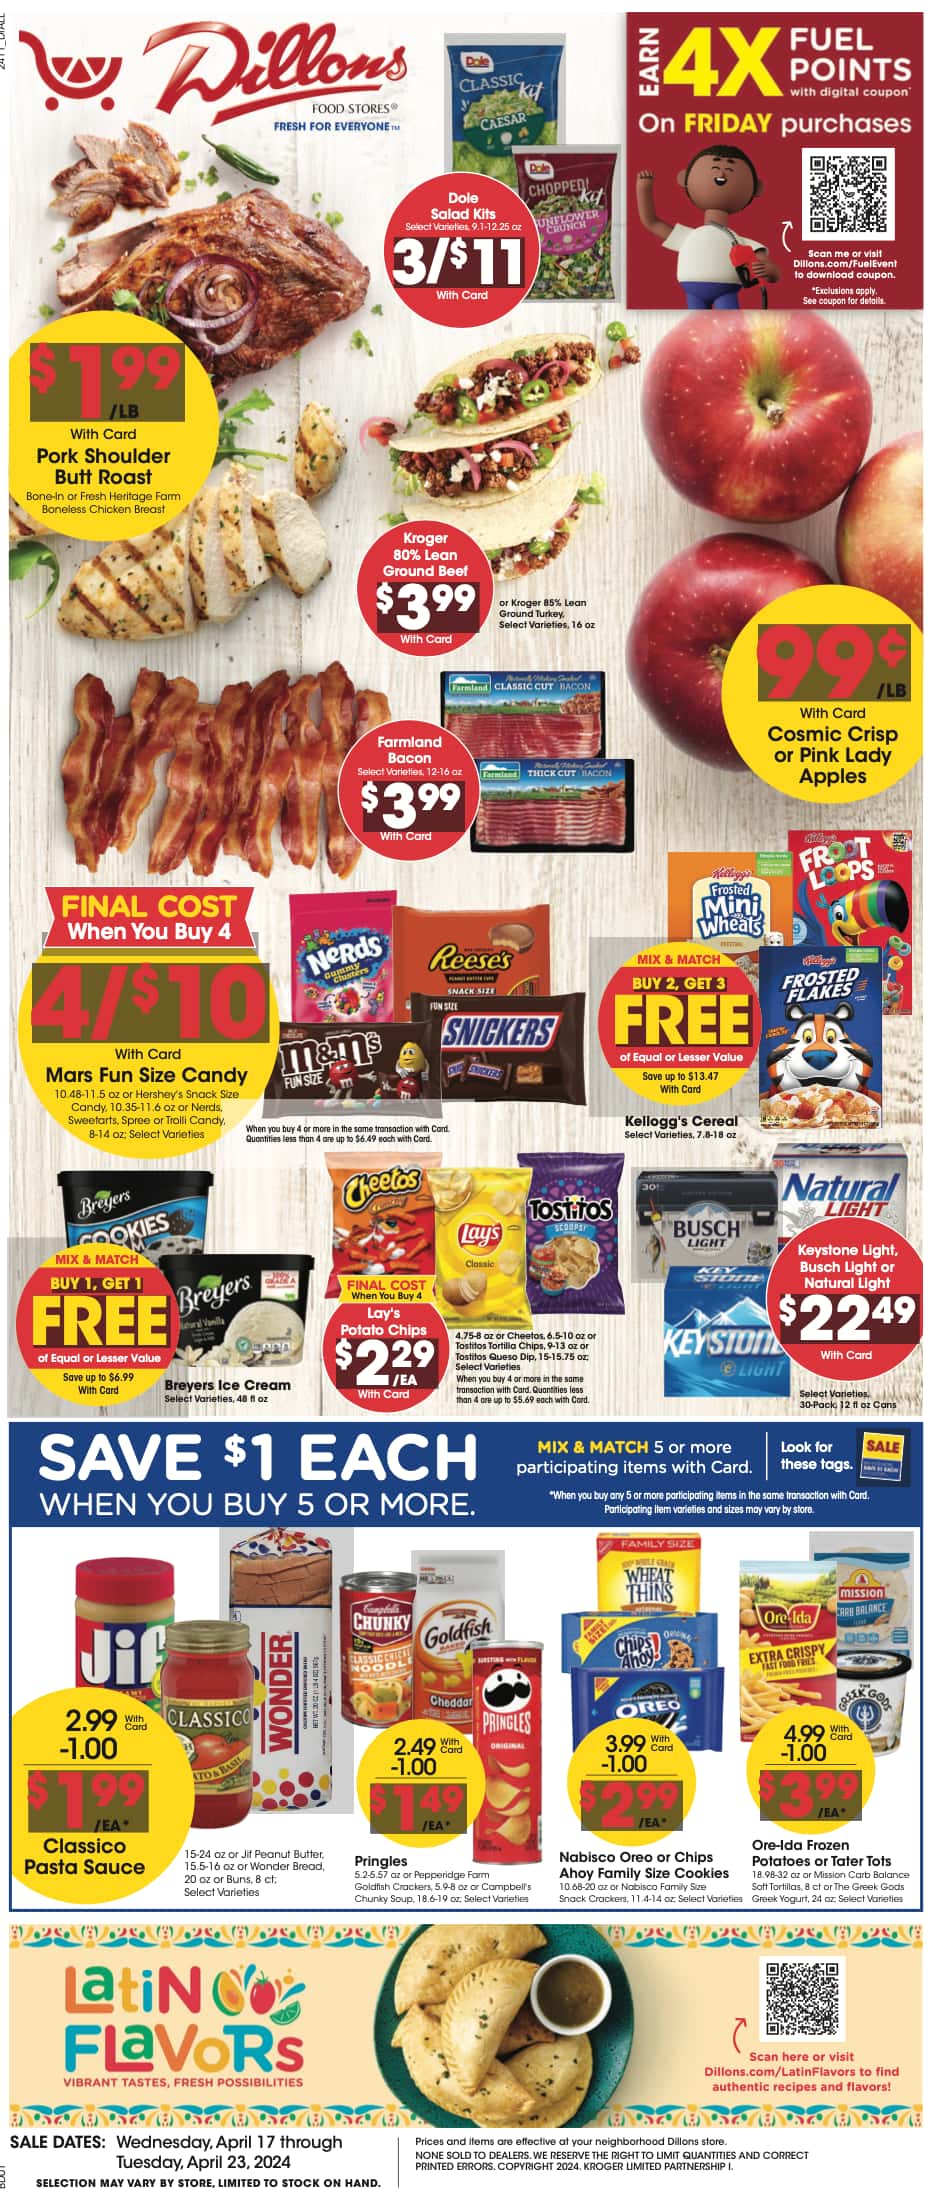 Dillons_weekly_ad_041724_01